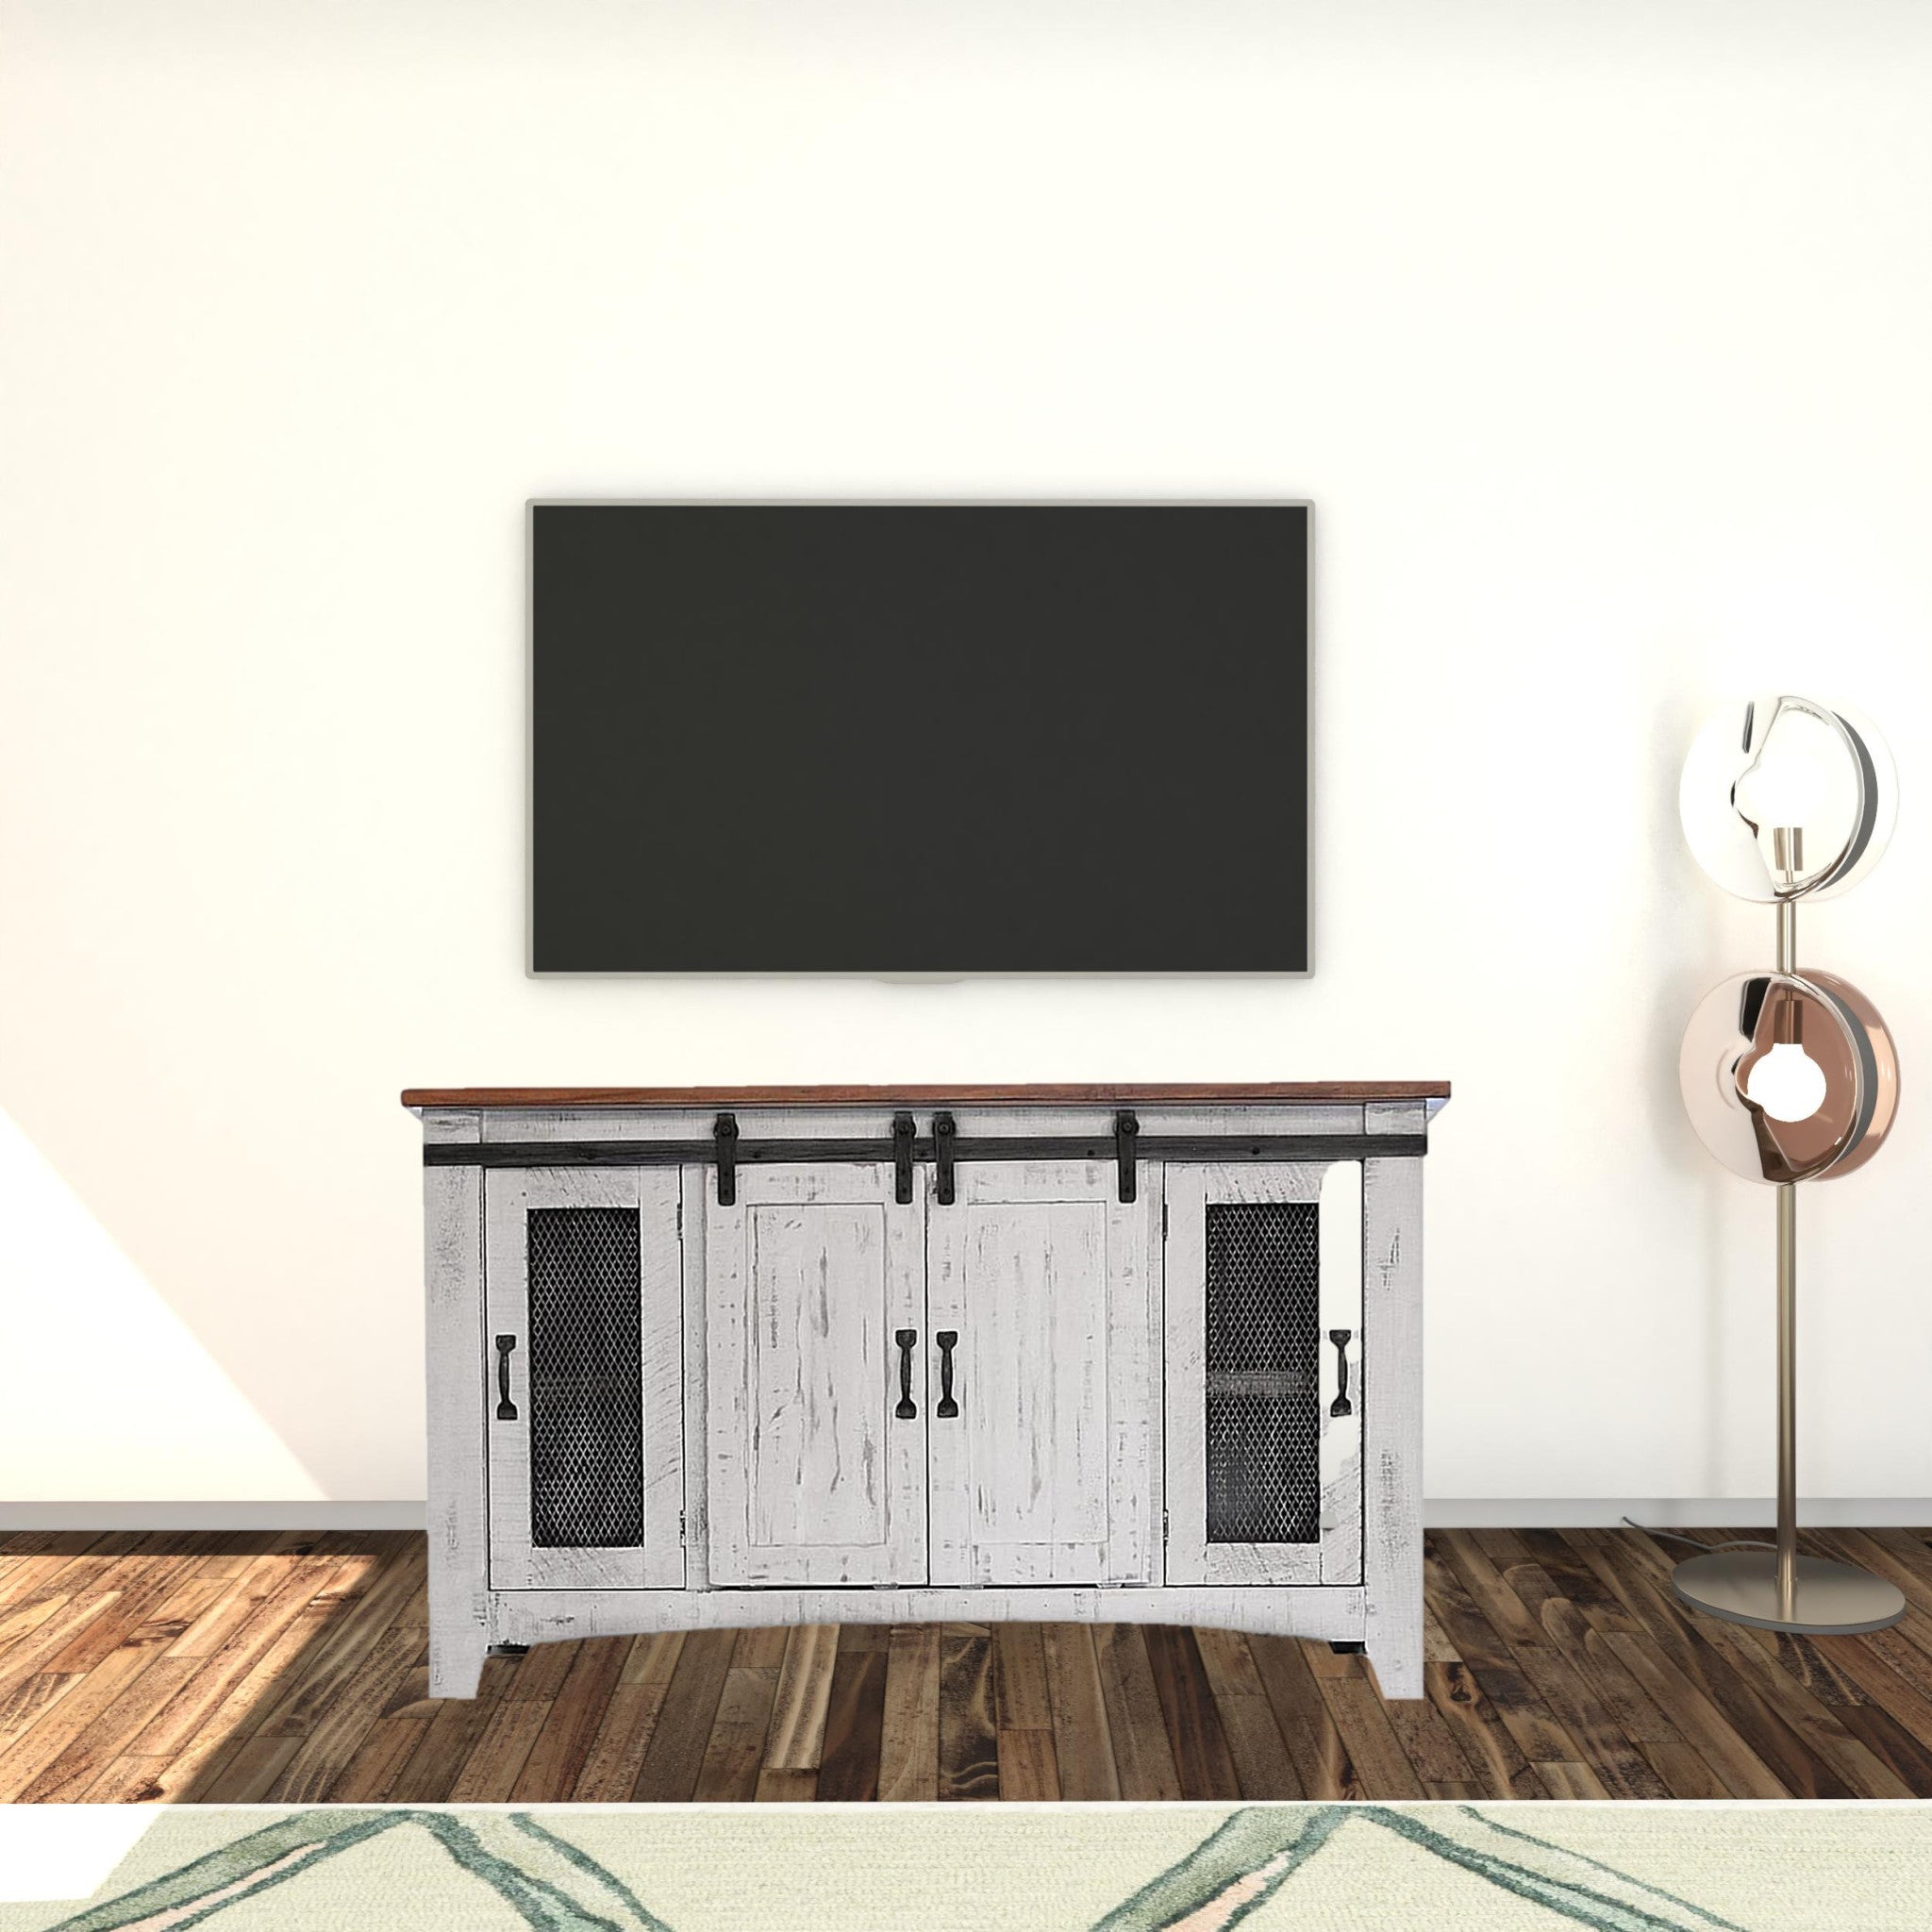 70" White Solid Wood Cabinet Enclosed Storage Distressed TV Stand